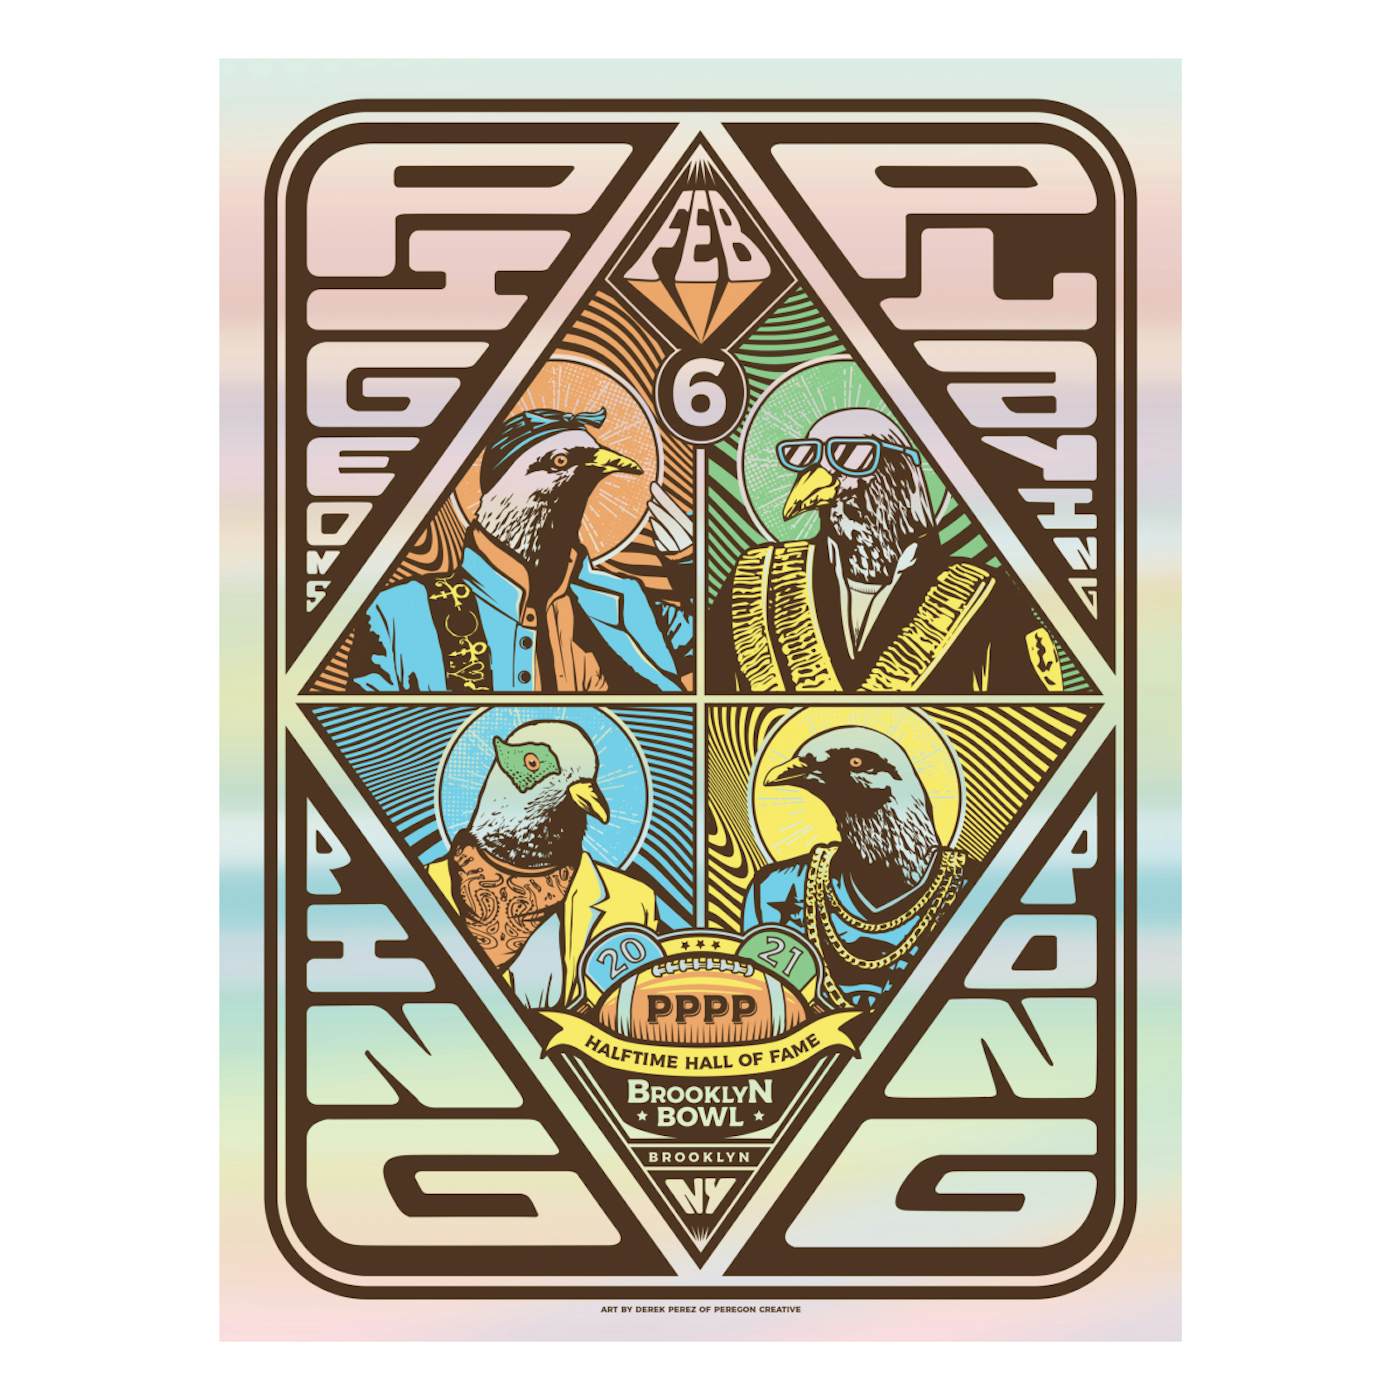 Pigeons Playing Ping Pong "Halftime Hall of Fame" Foil Poster